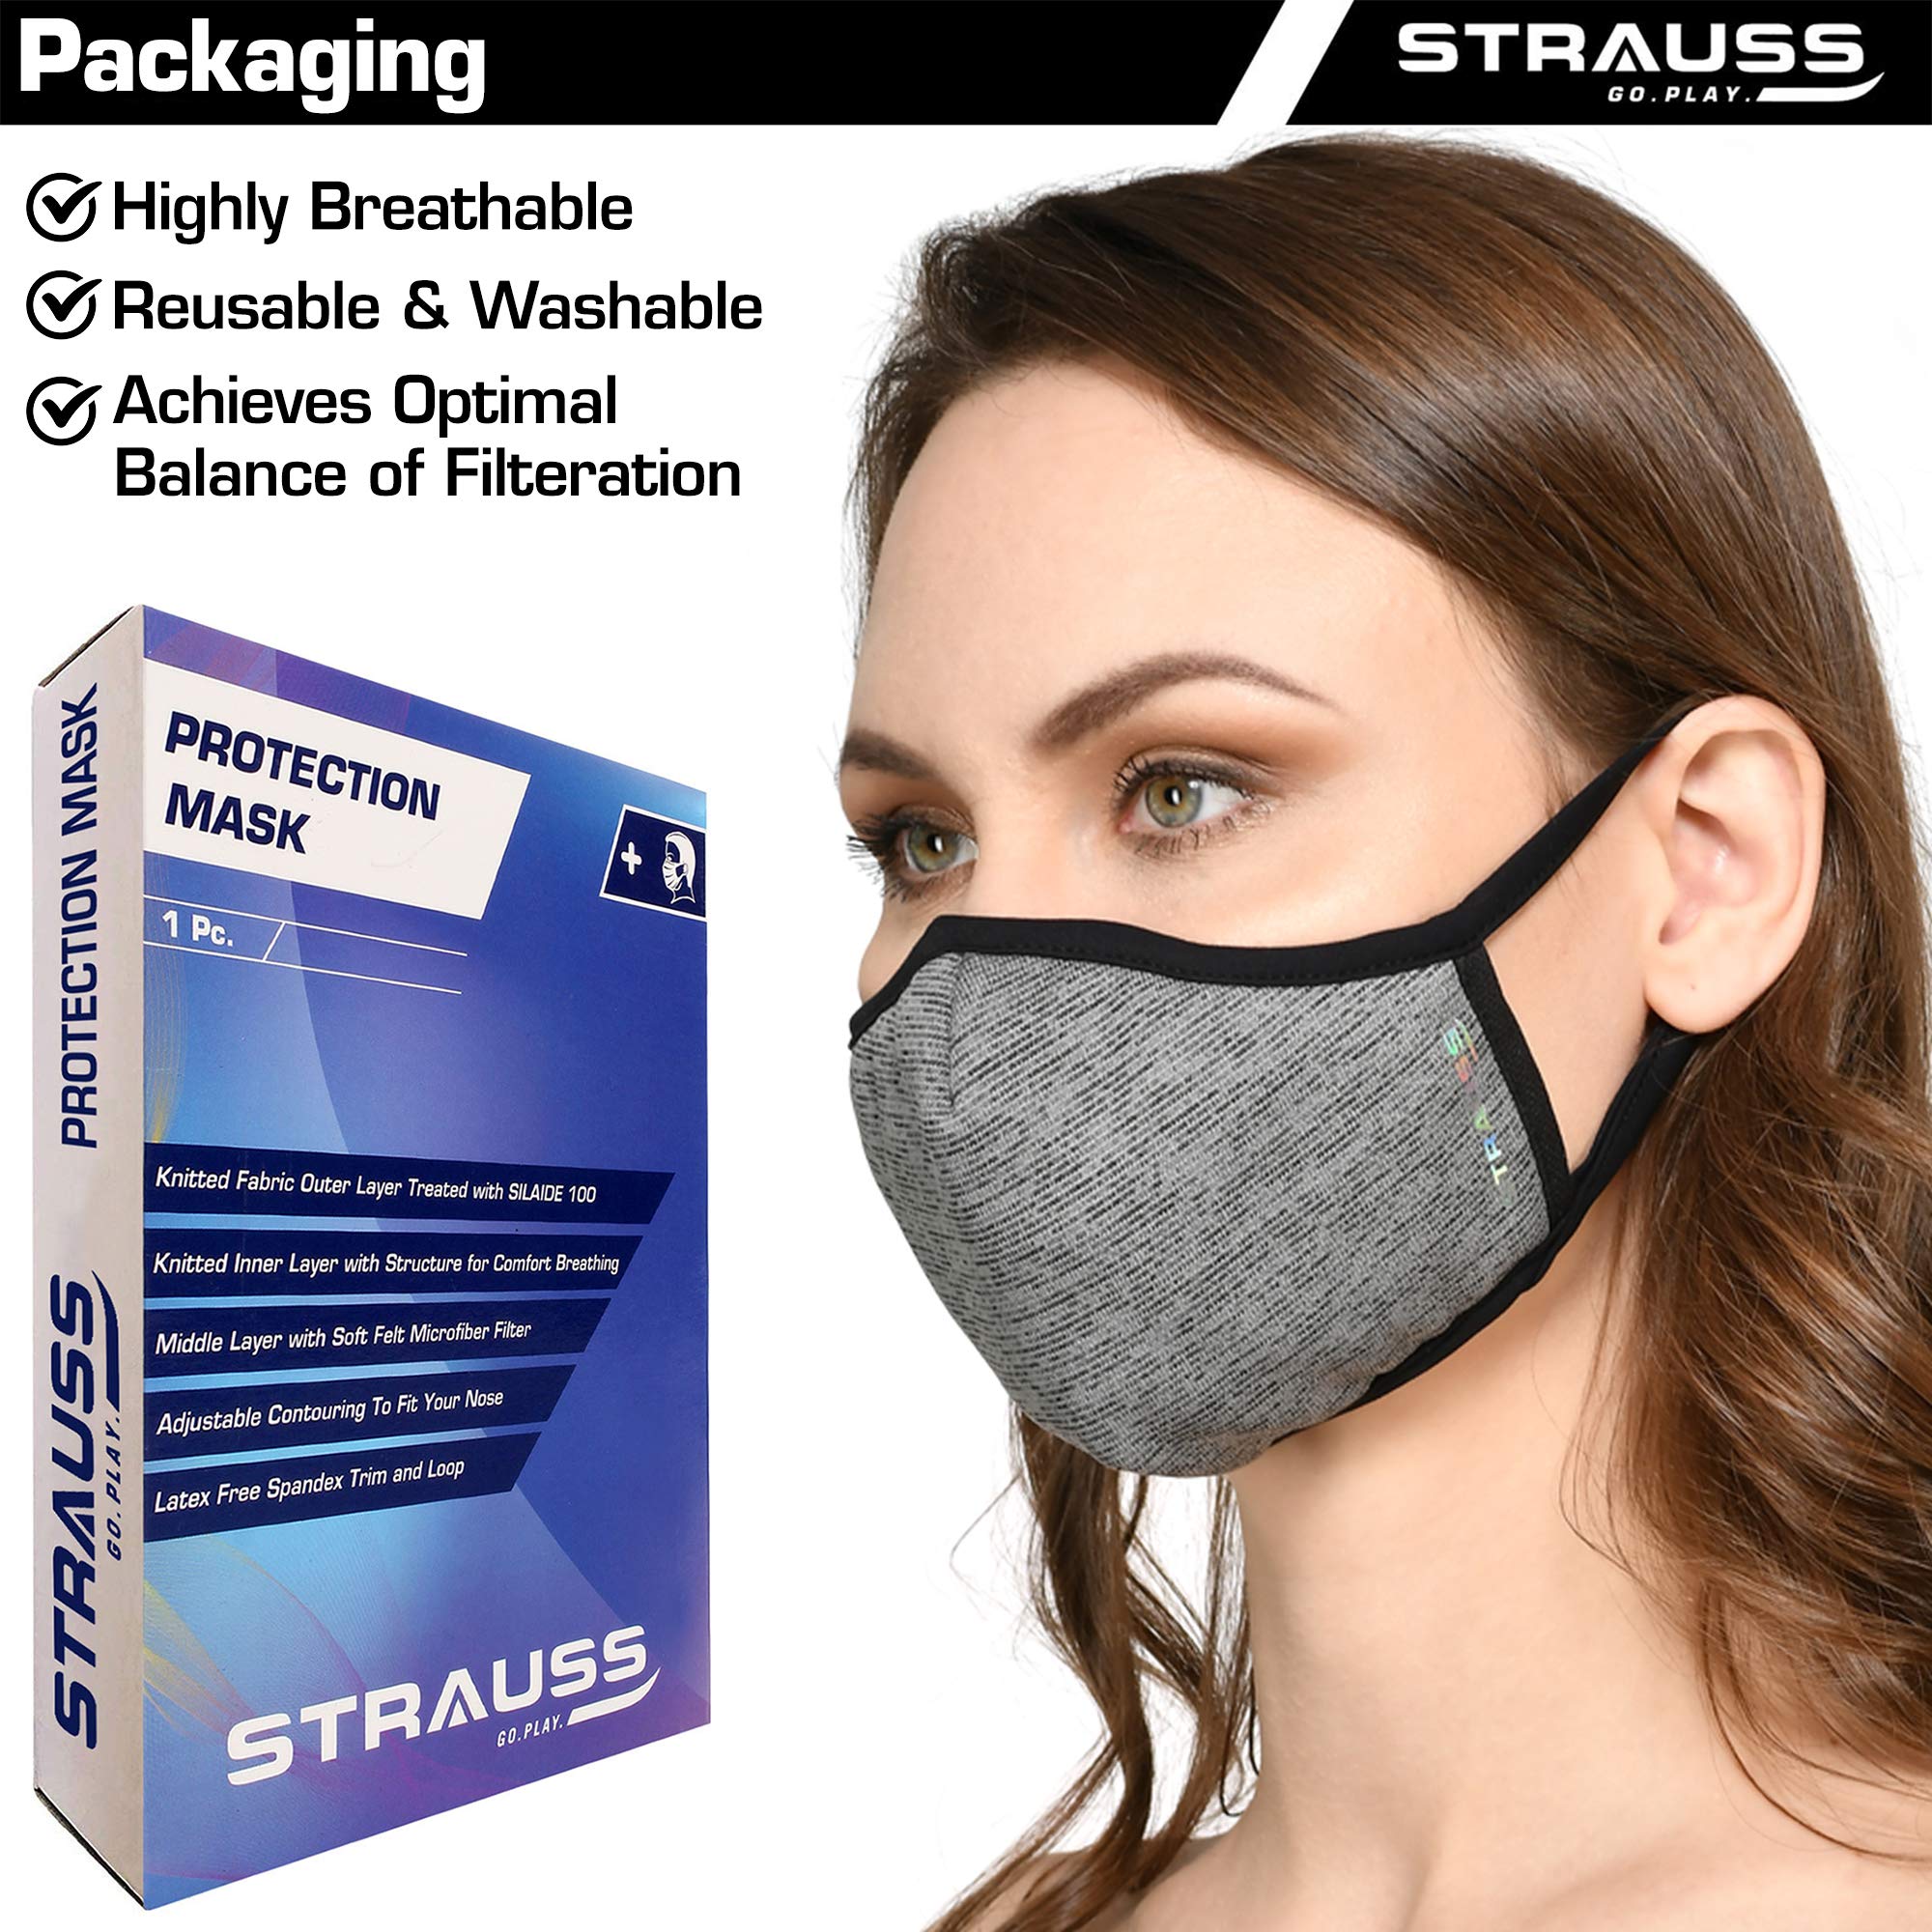 STRAUSS 3D Sponge Blue Seat Cover with Non Vent Face Protection Grey Mask (Medium)